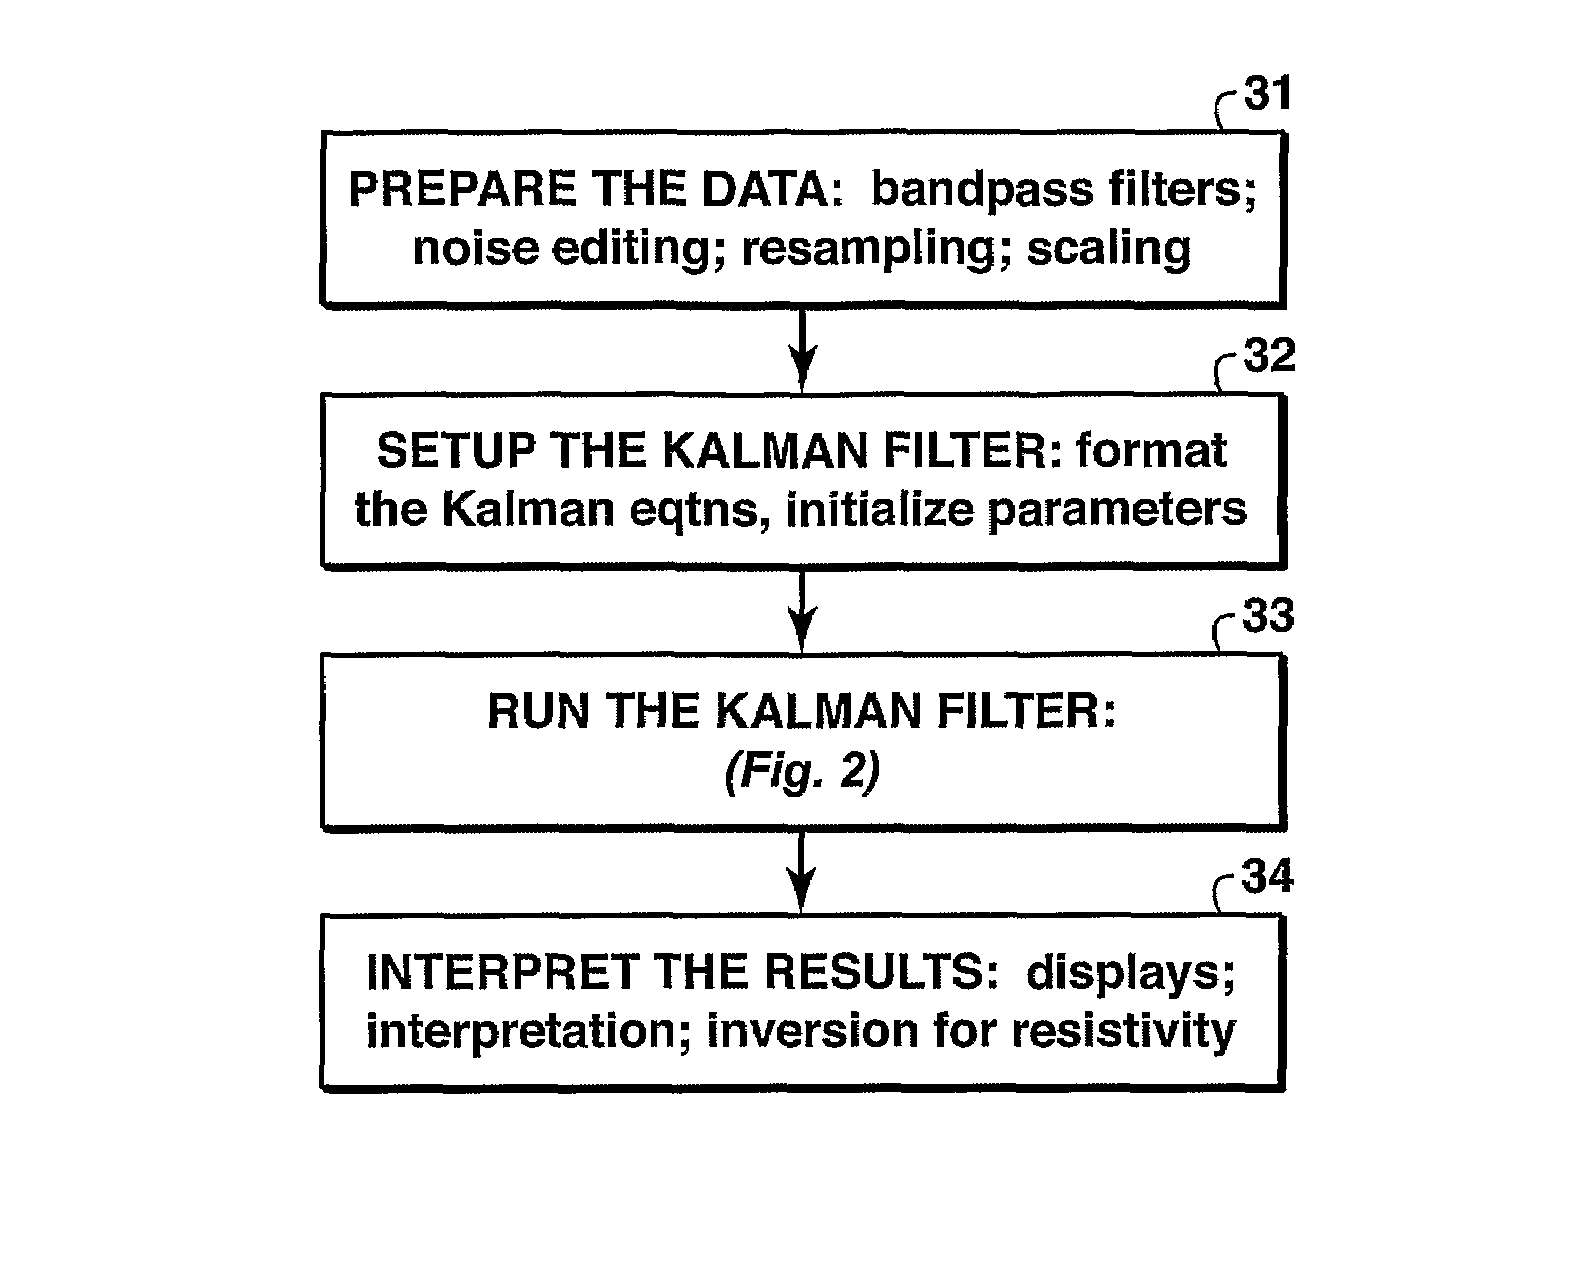 Kalman filter approach to processing electromagnetic data